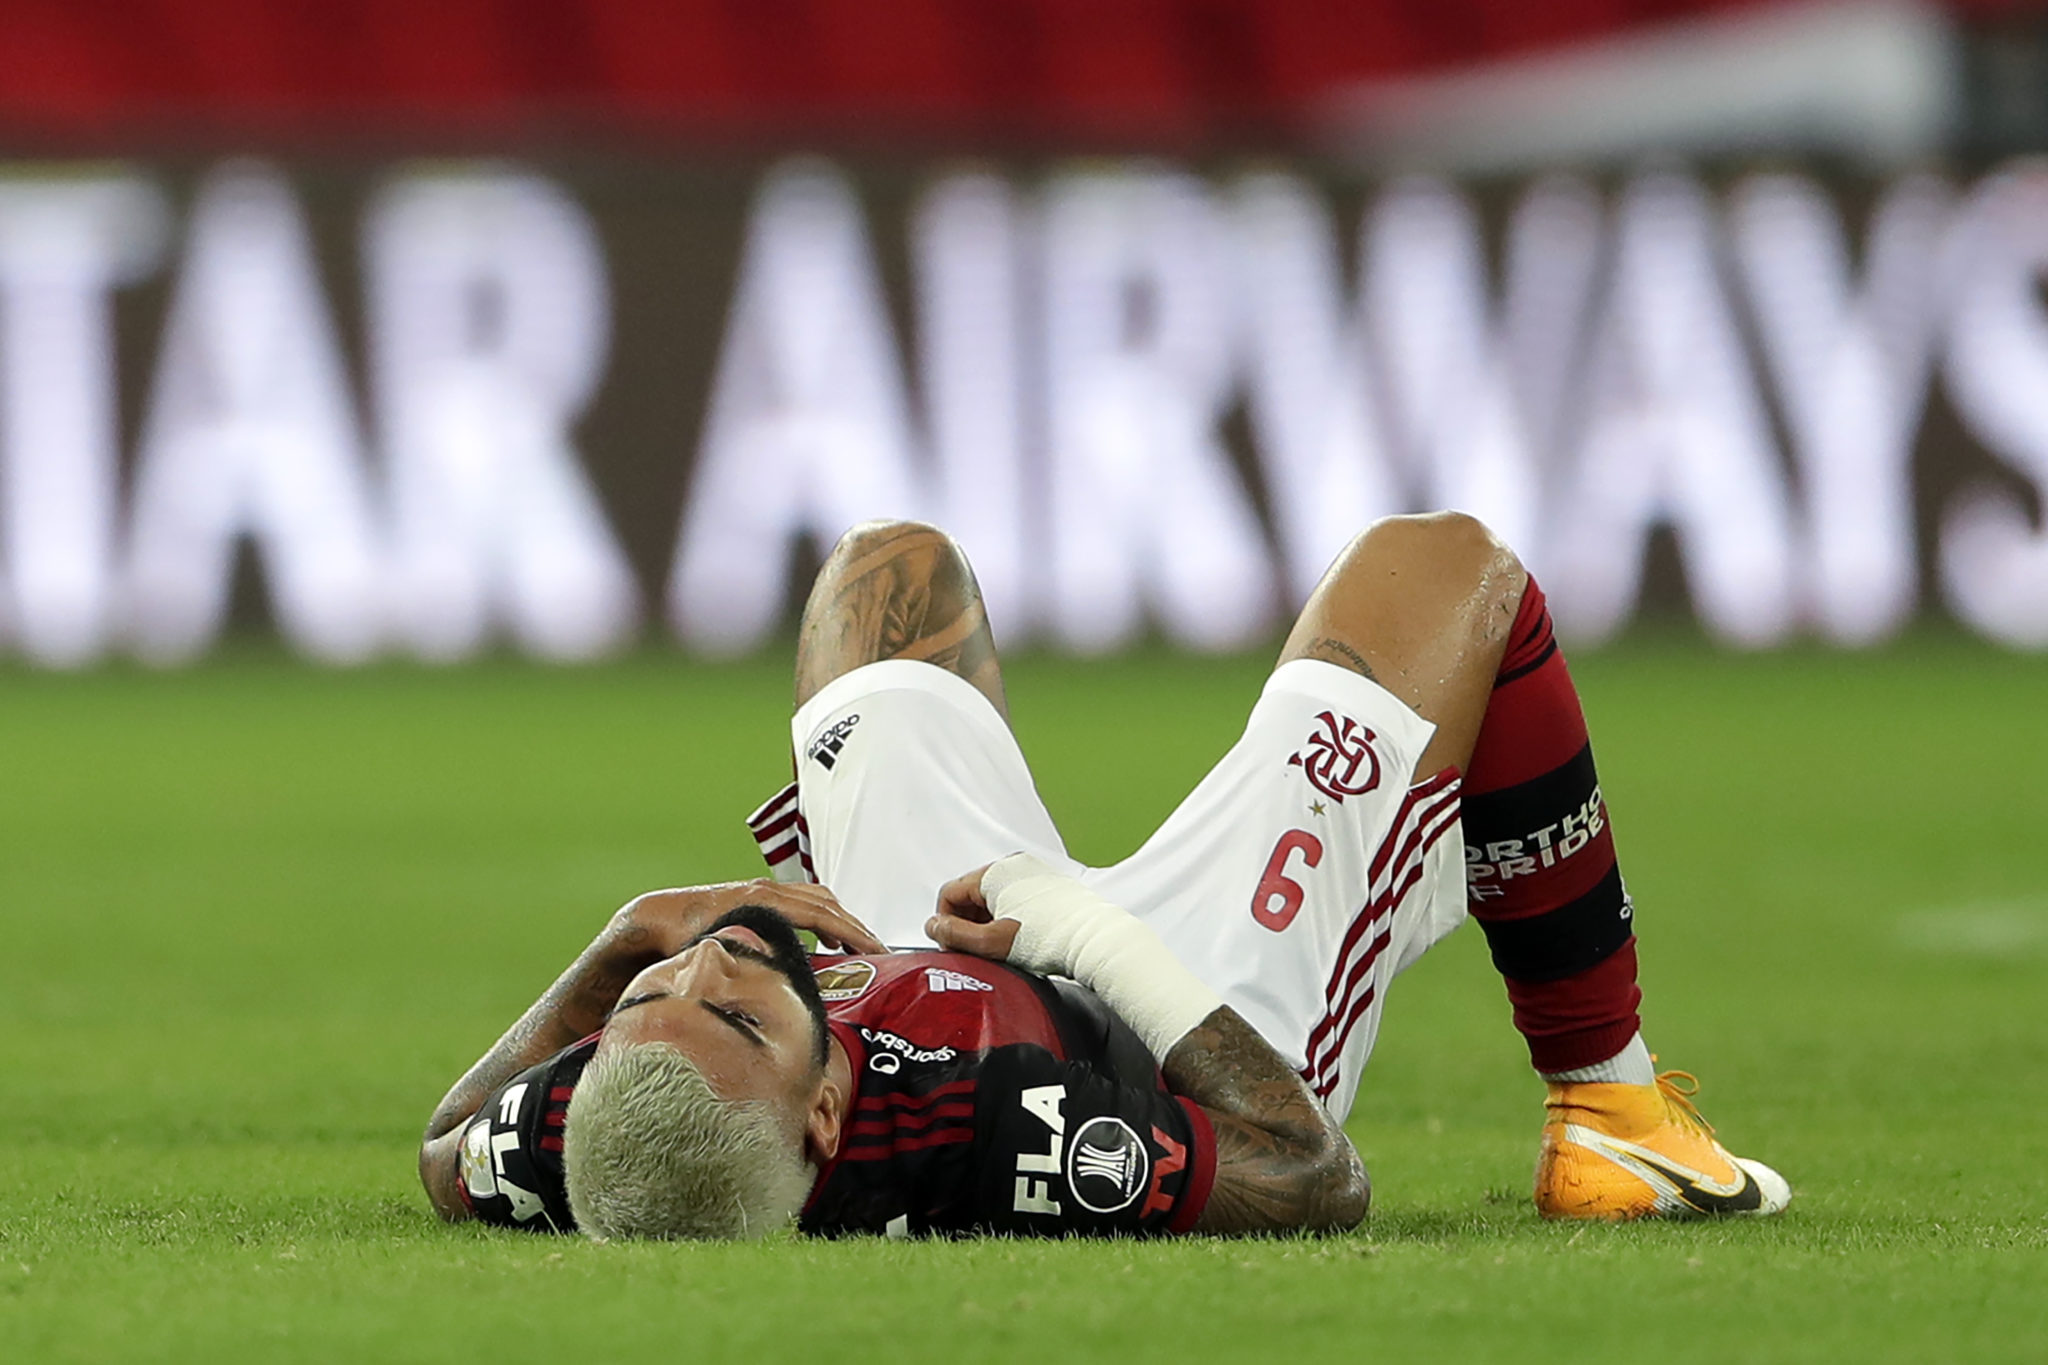 RIO DE JANEIRO, BRAZIL - SEPTEMBER 30: Gabriel Barbosa of Flamengo  reacts after suffering and injury during a Copa Libertadores 2020 Group A match between Flamengo and Independiente del Valle at Maracana Stadium on September 30, 2020 in Rio de Janeiro, Brazil.  All games of the tournament are played behind closed doors to avoid spread of COVID-19. (Photo by SIlvia Izquierdo-Pool/Getty Images)